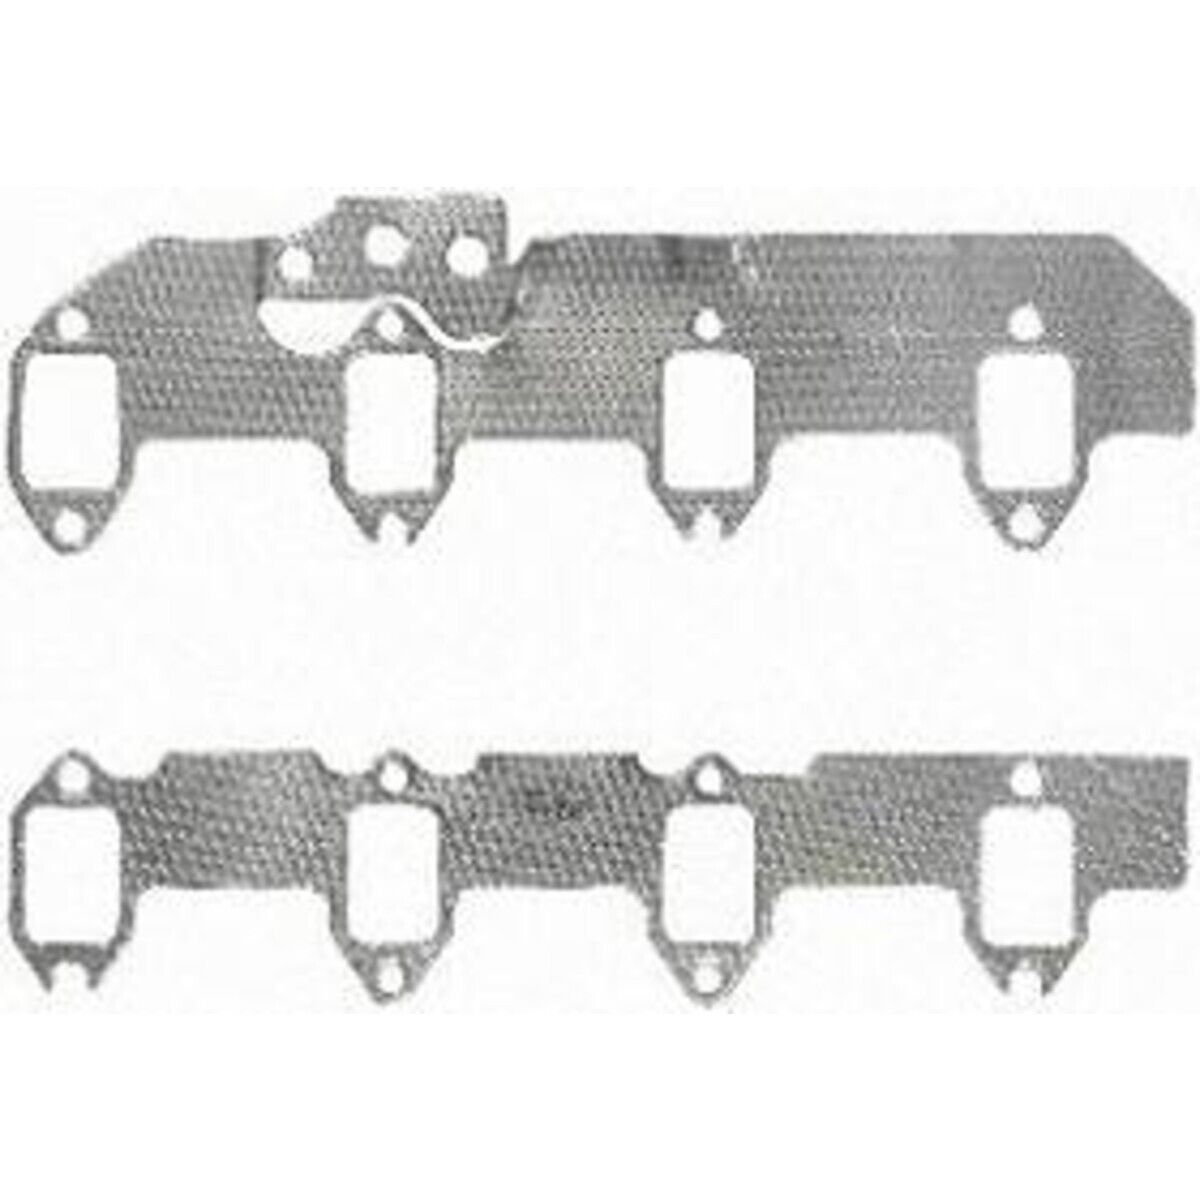 MS9454B Felpro Exhaust Manifold Gaskets Set for Ford Thunderbird Continental